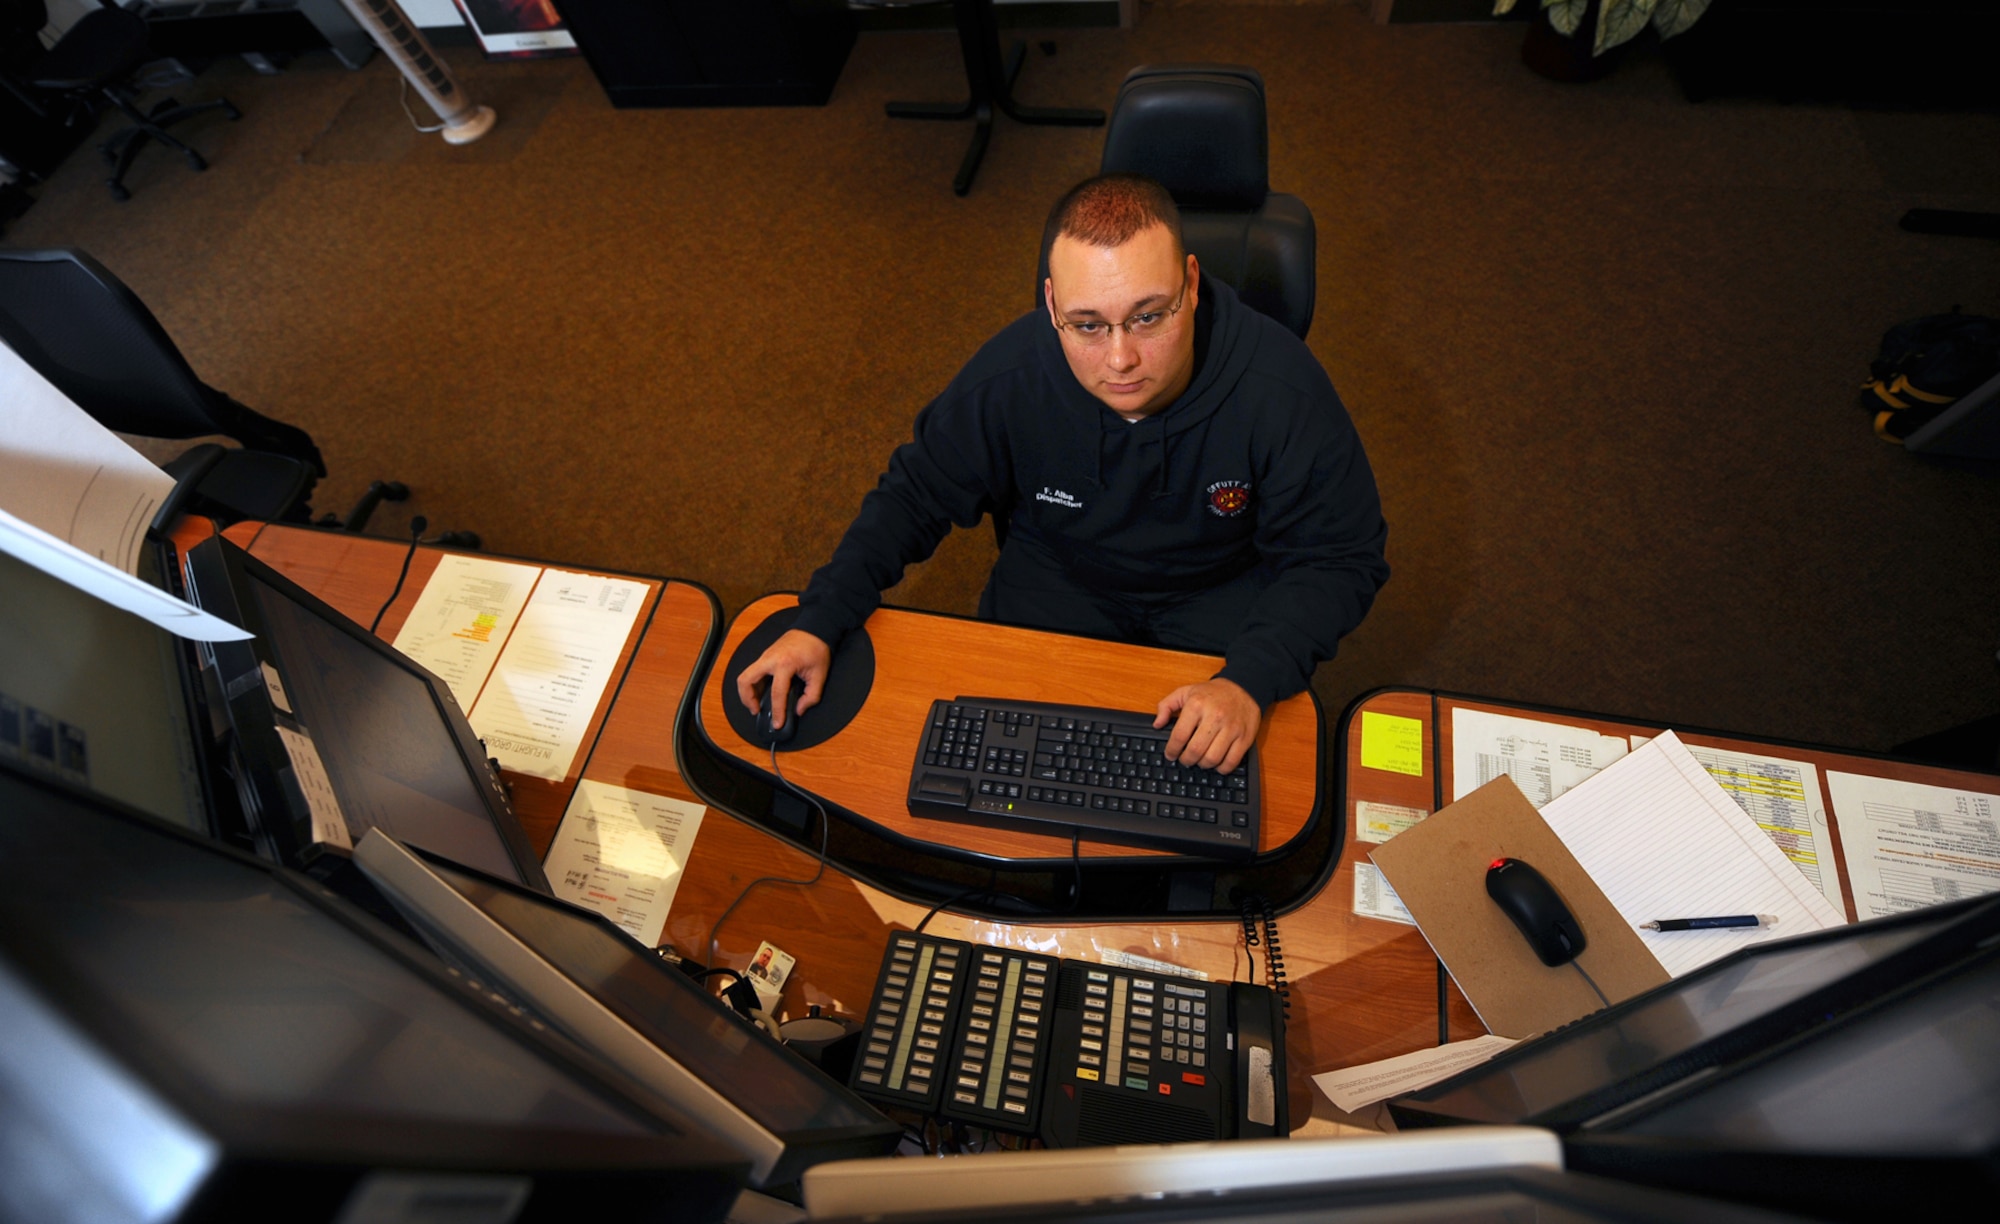 OFFUTT AIR FORCE BASE, Neb. - Frank Alba, a dispatcher for the 55th Civil Engineering Squadron Fire Department, monitors cameras and mans the emergency phone lines in the fire station.  Fire department dispatchers are knowledgeable in all areas regarding fire fighting and are essential to ensuring firefighters are dispatched in a timely manner. U.S. Air Force photo by Josh Plueger
